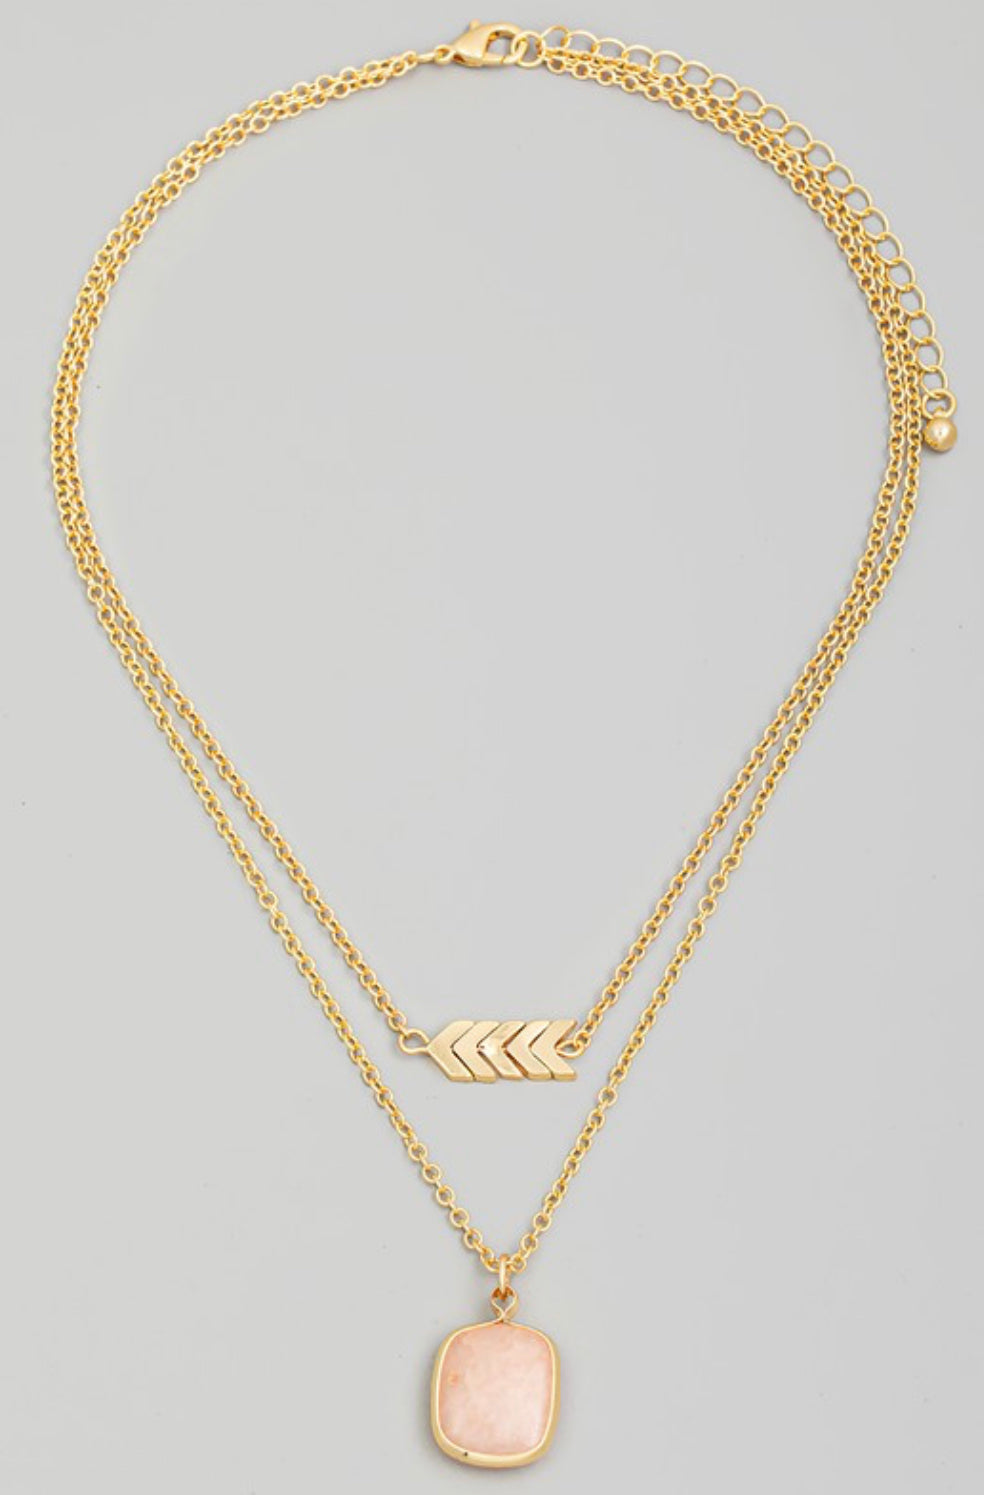 The Lola Layered Chain Square Stone Necklace